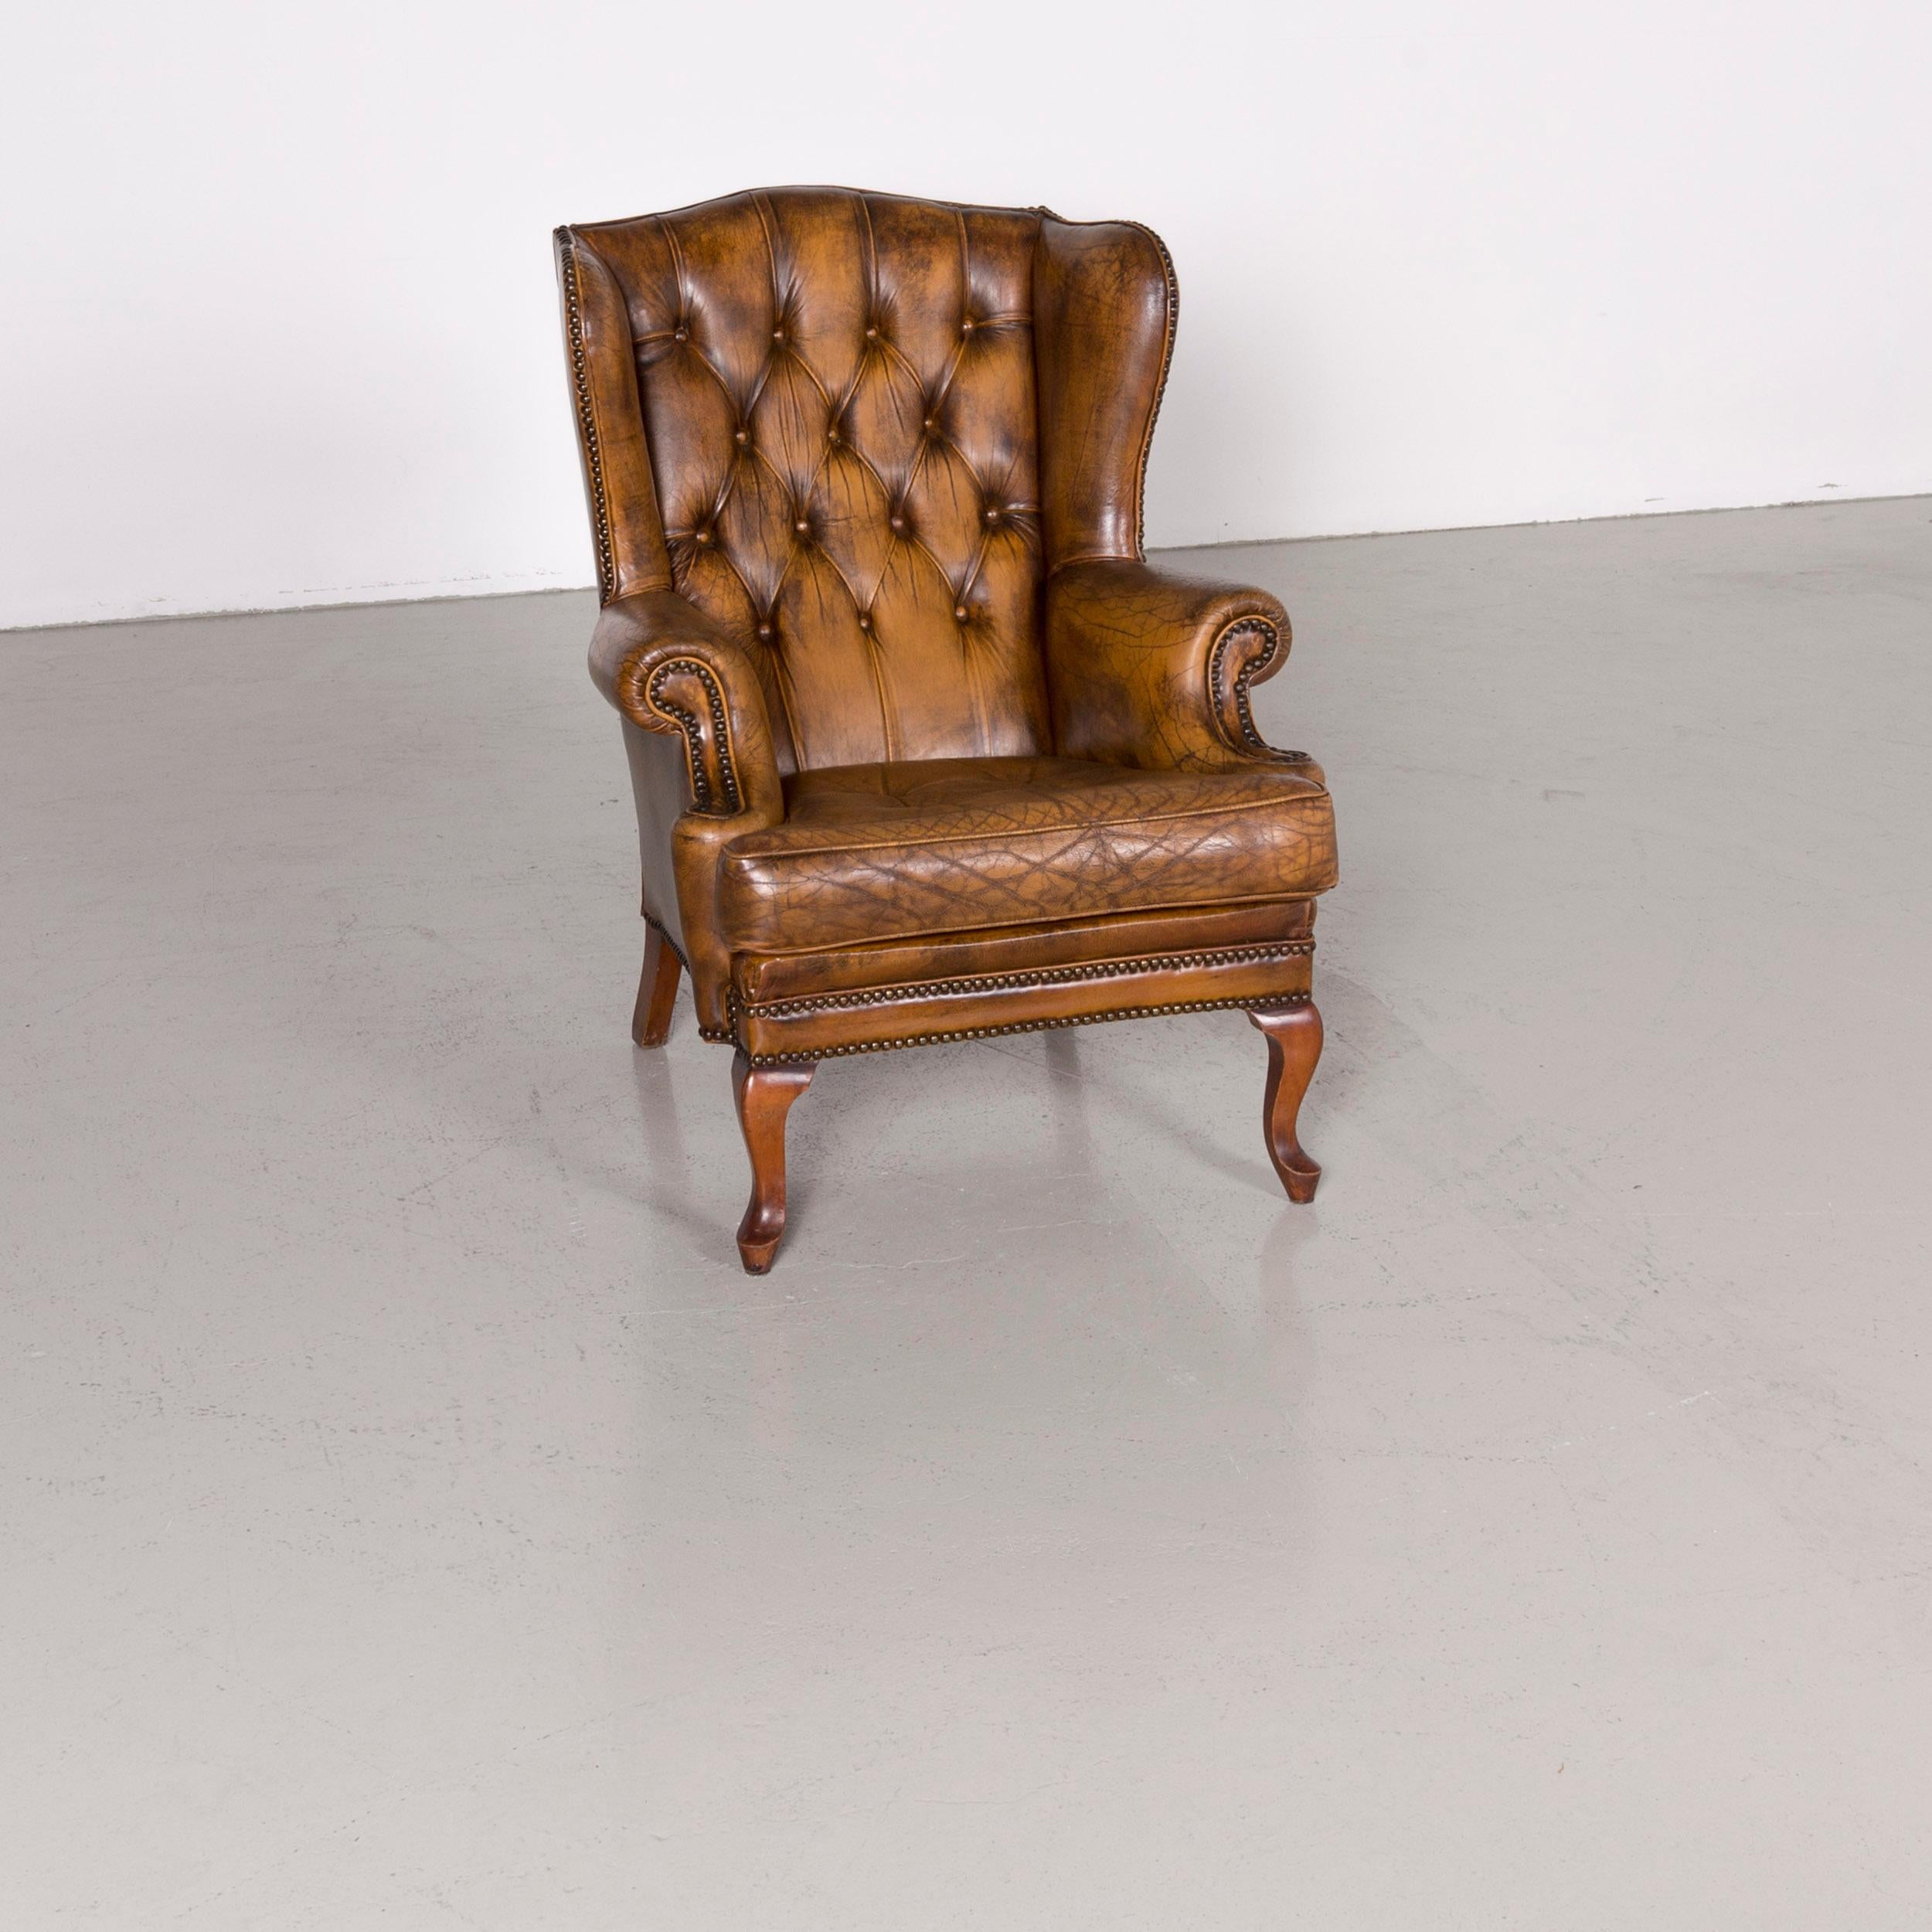 Chesterfield leather armchair brown vintage retro.